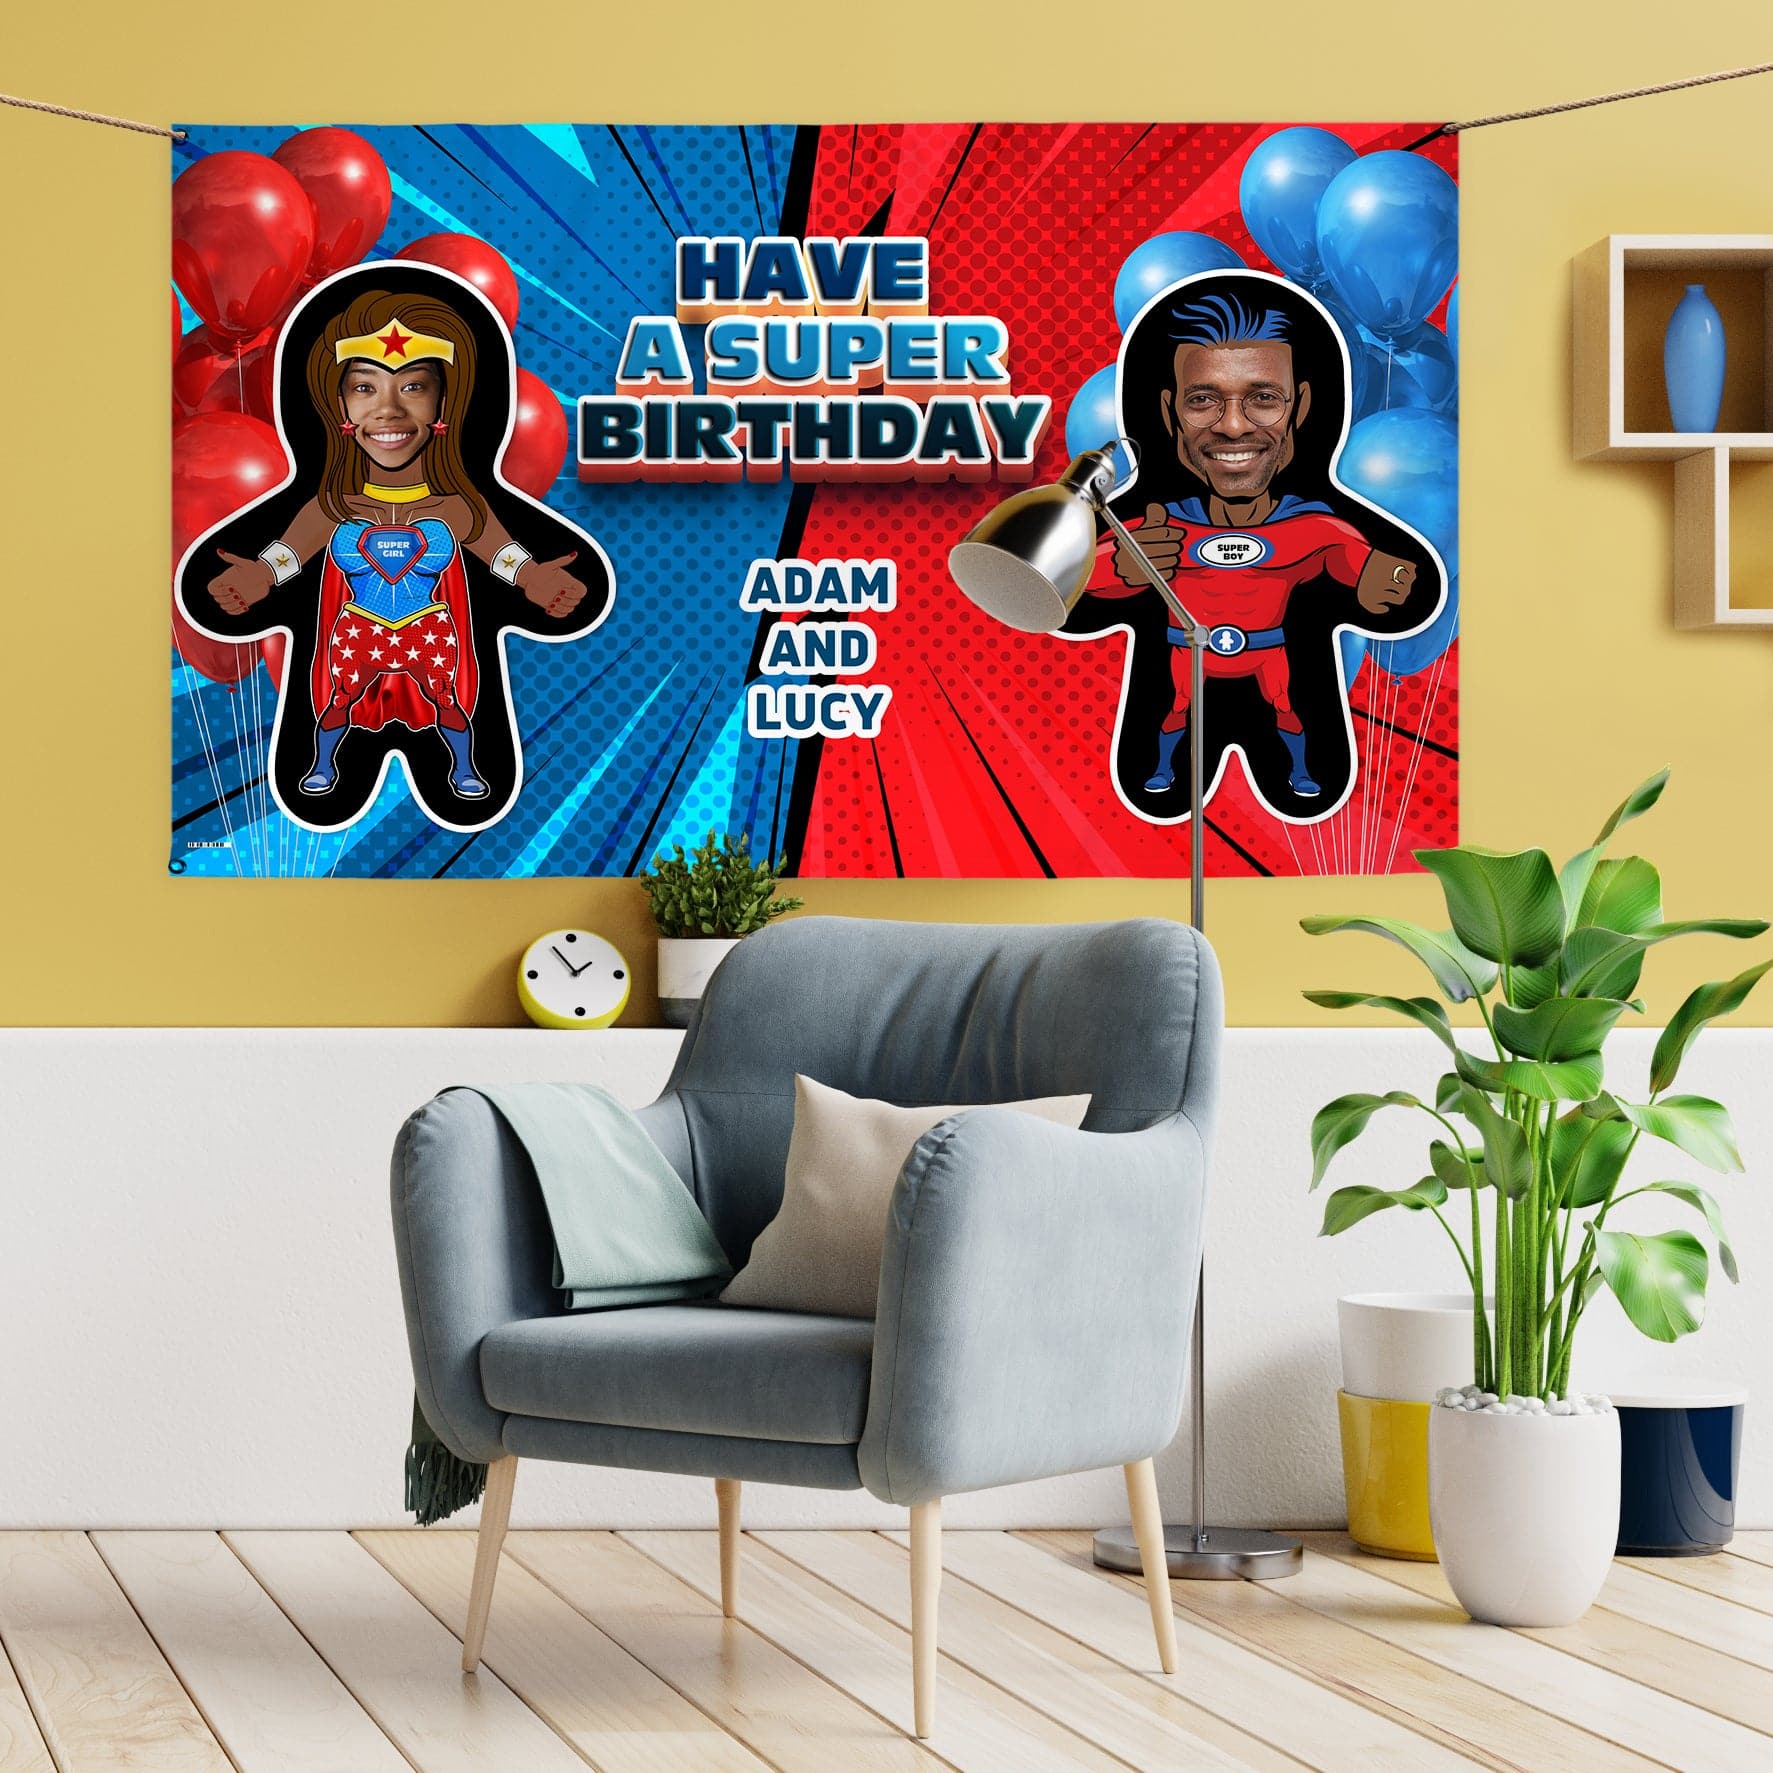 Superhero Battle - Mini Me World - Add Any Text And Your Face - 5FT X 3FT